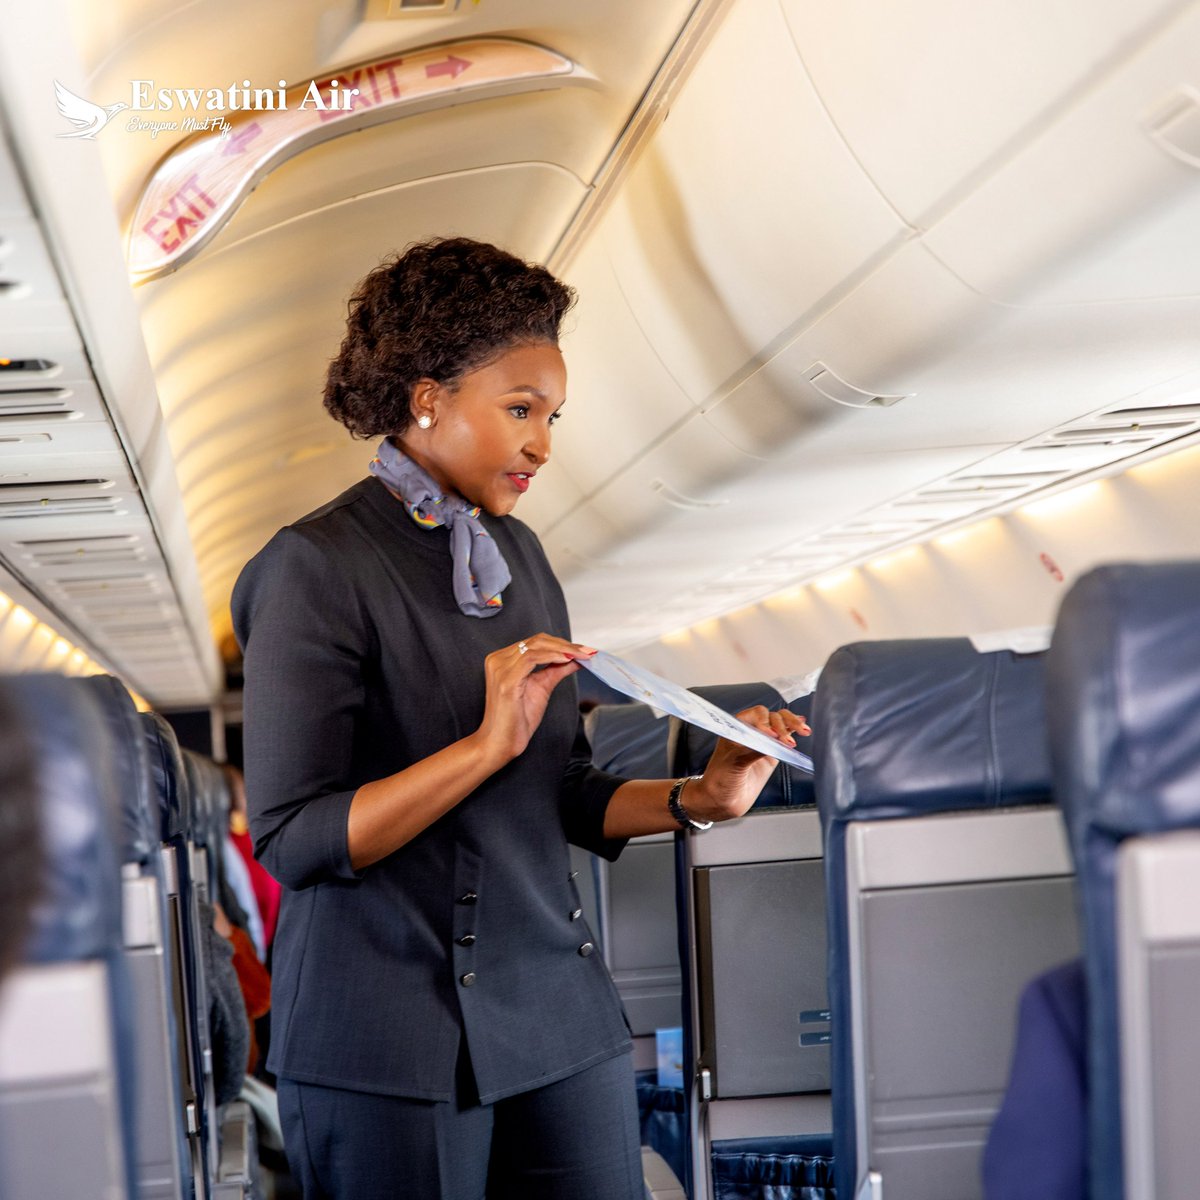 Flying this week? Get ready to sit back, relax, and enjoy Eswatini Air’s finest hospitality.

Catch a flight on 🌍 eswatiniair.co.sz 

#FlyEswatiniAir #Airtravel #EswatiniAirCabinCrew
#EveryoneMustFly